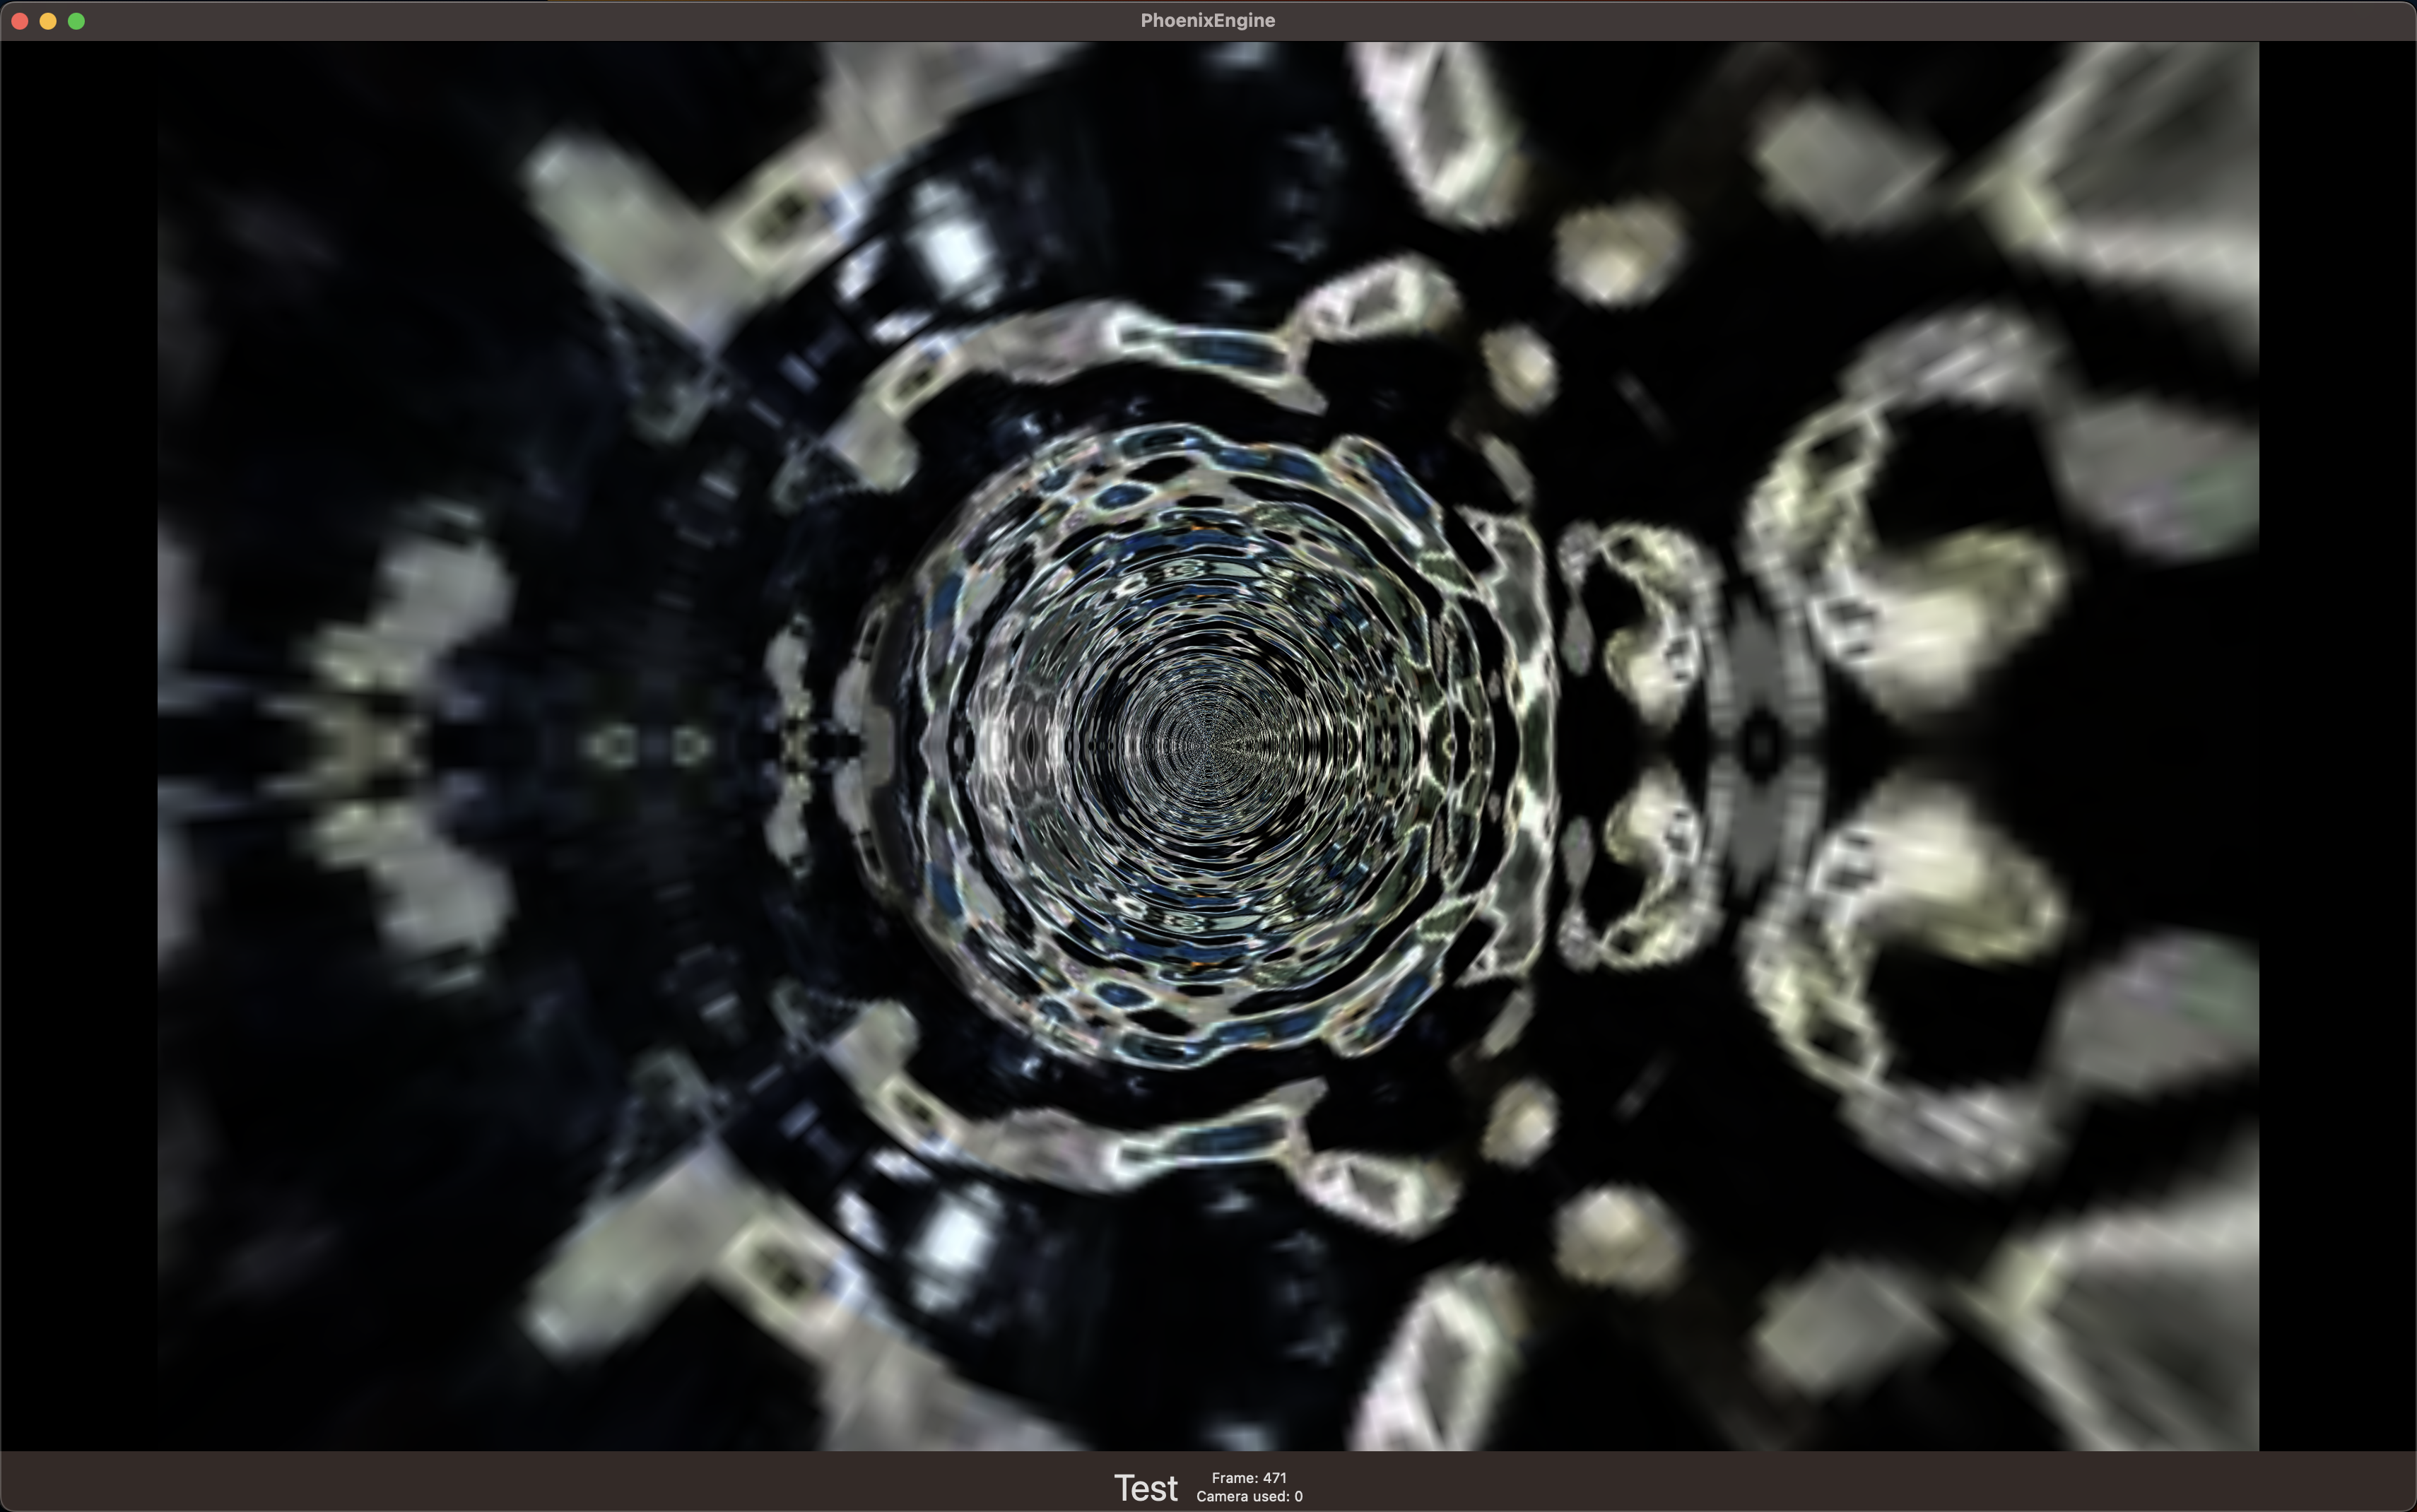 Second example of the Tunnel effect, rendered in the Frame Engine editor